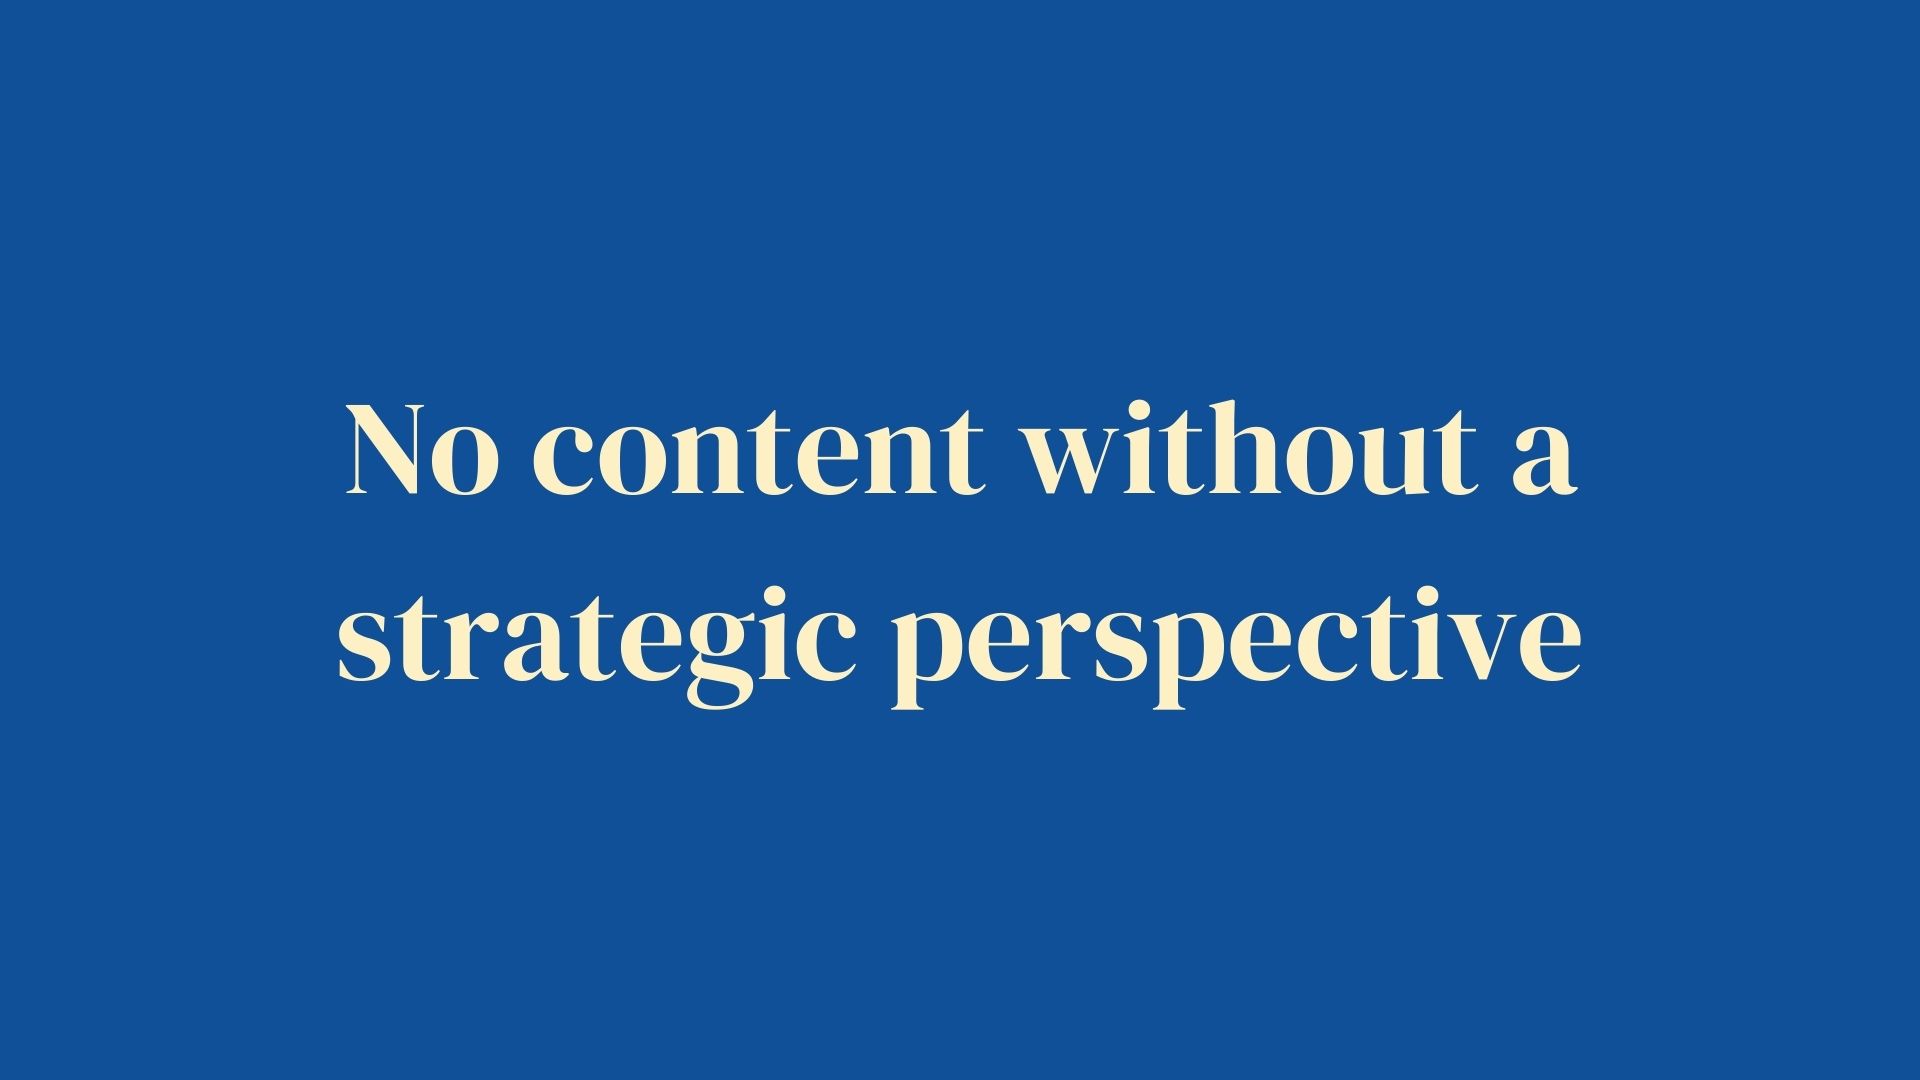 No content without a strategic perspective